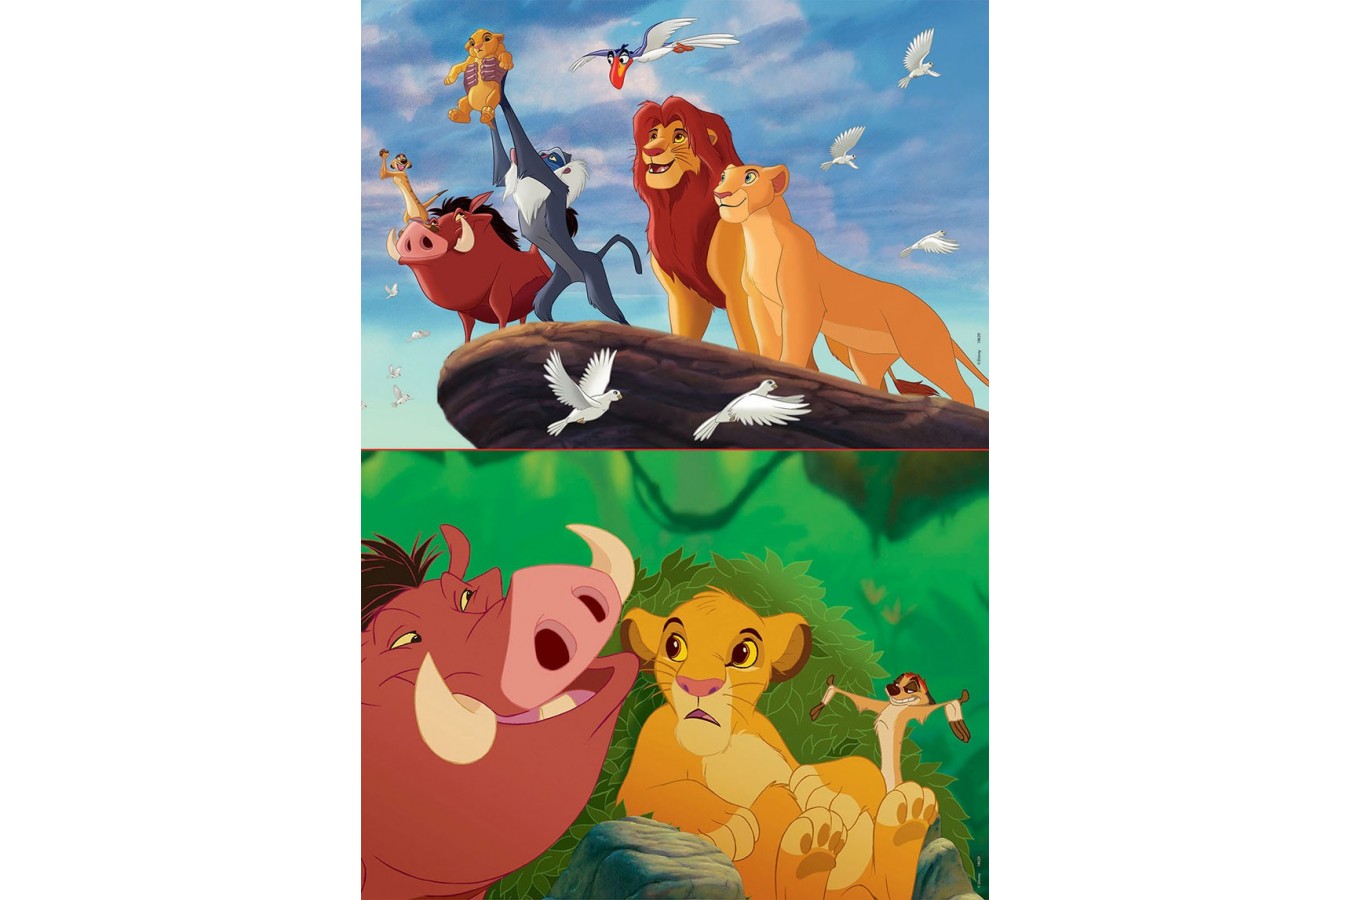 Puzzle Educa - The Lion King, 2x48 piese (18629)